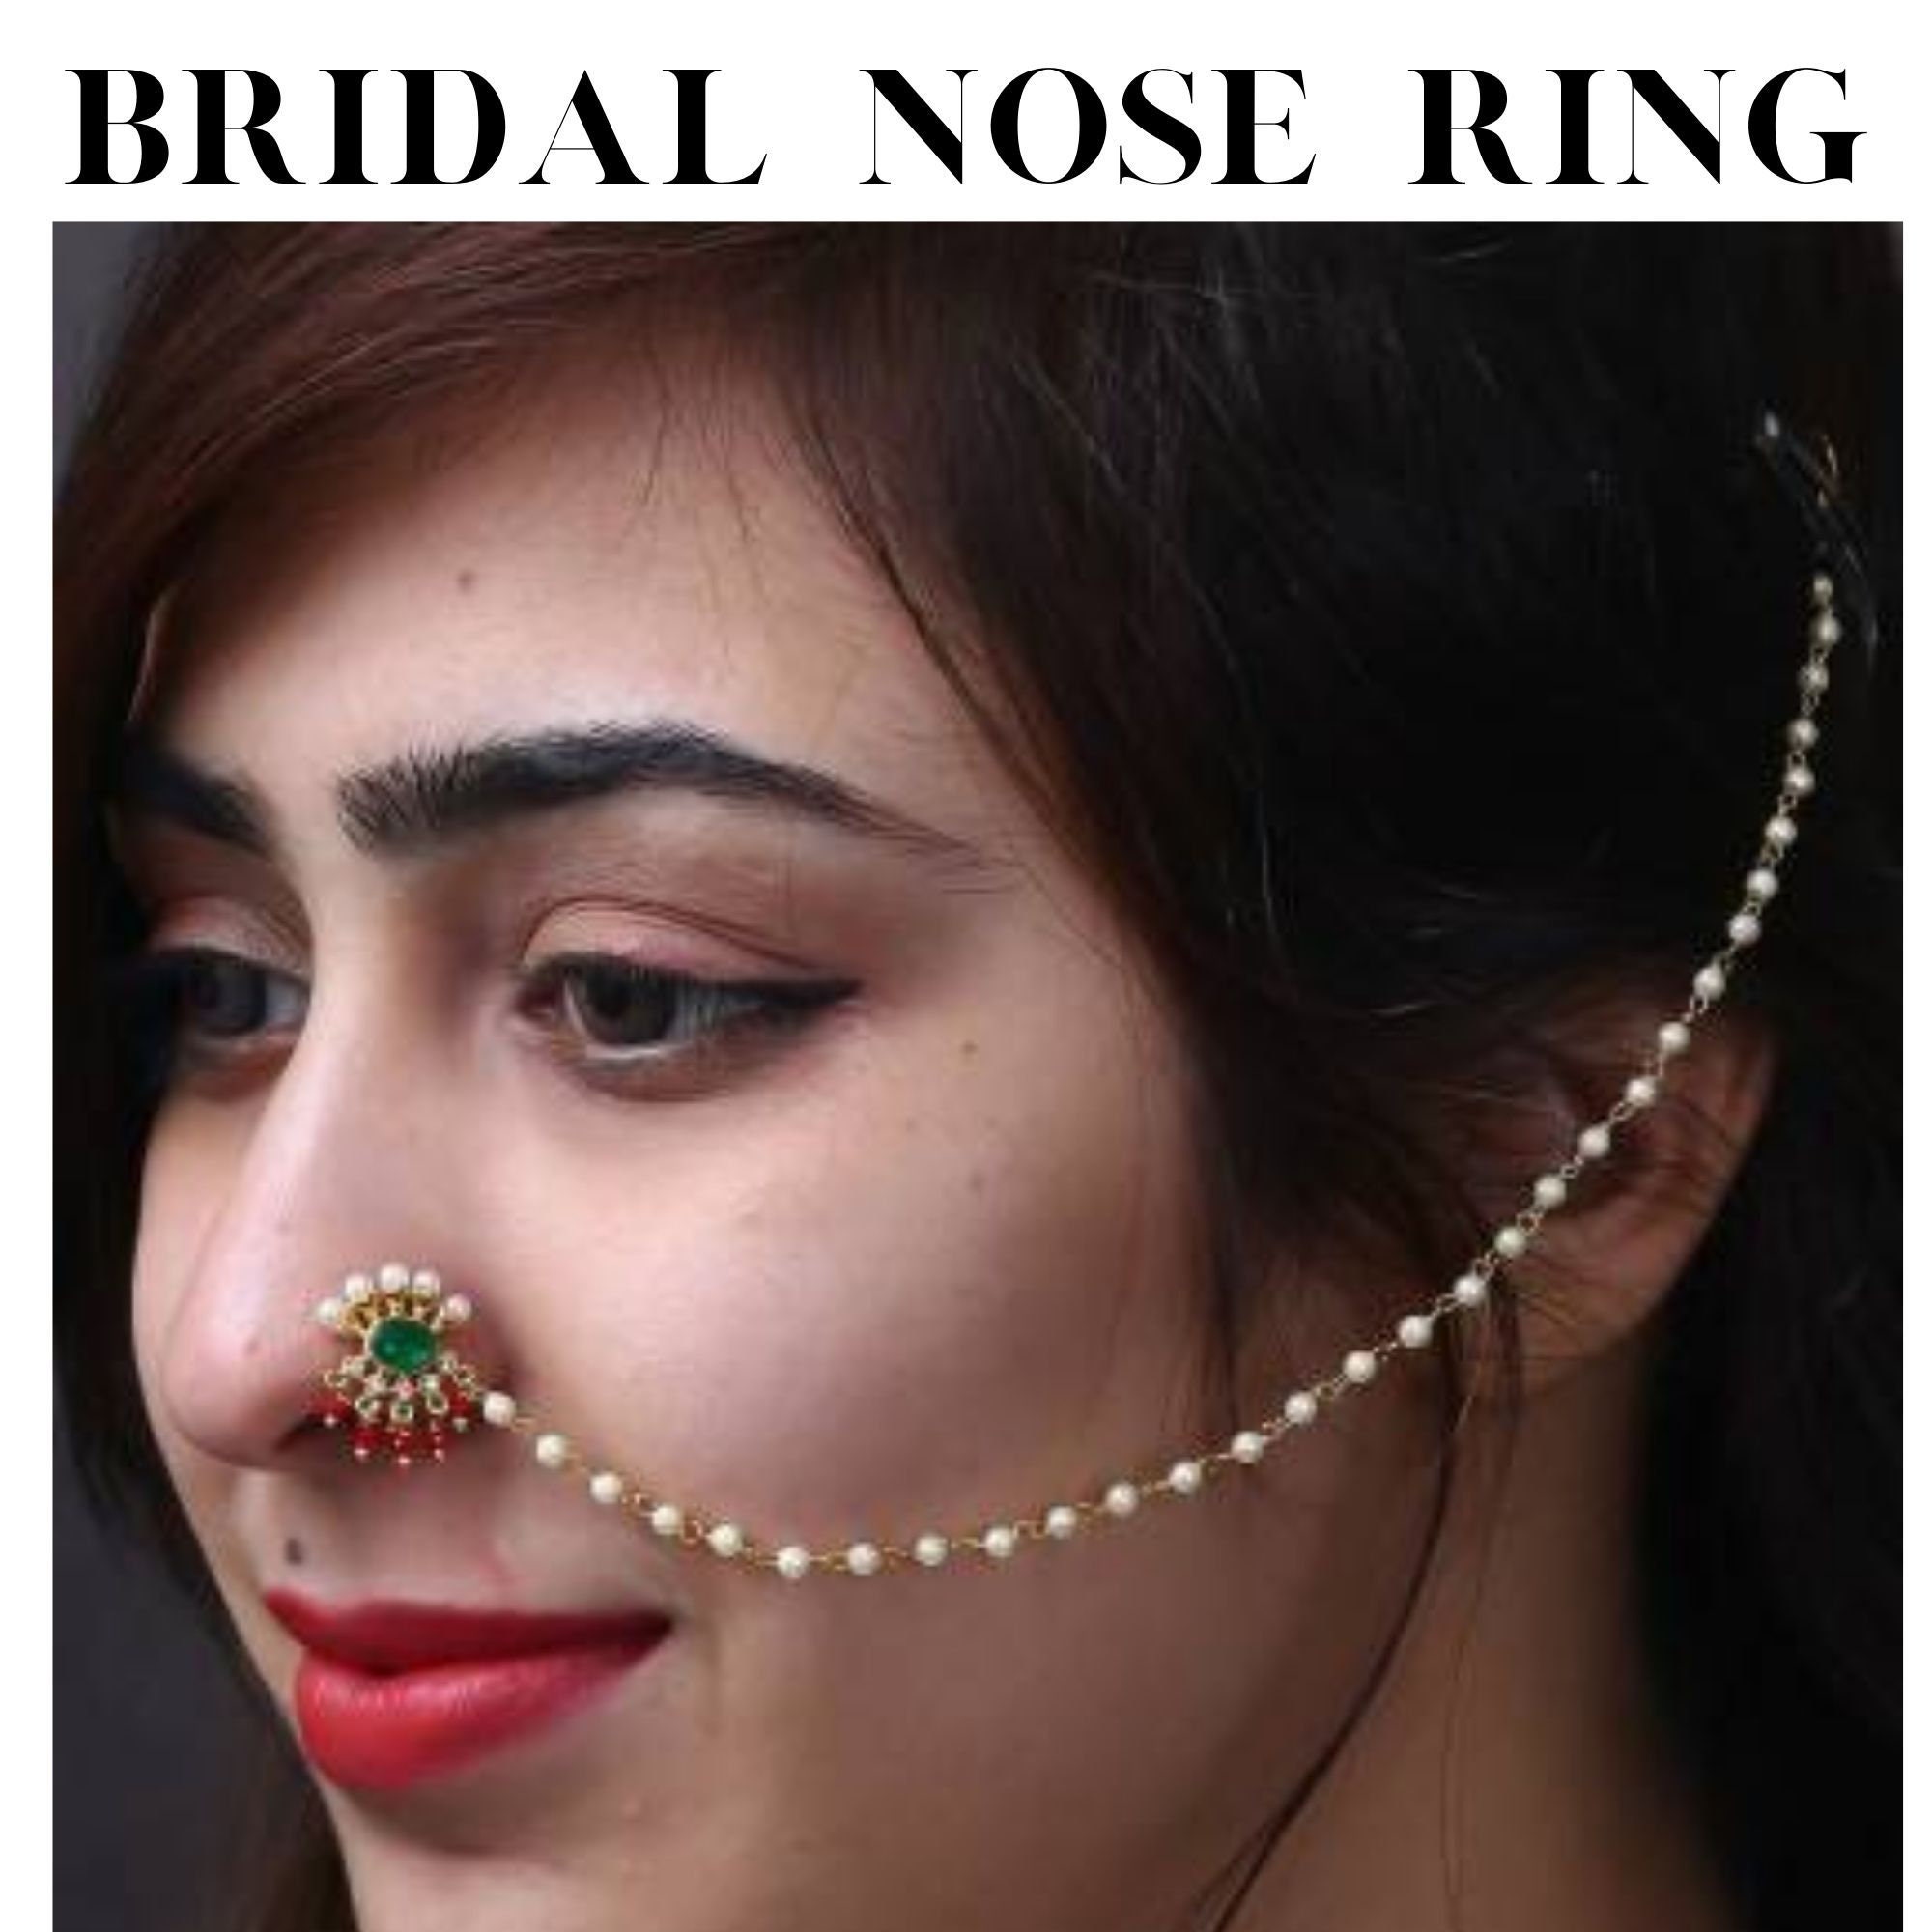 Buy Chinar Jewels Nathiya Bridal Nose Rings/Nath/Nathni in Red and Golden  Color 5.0 cm in Diameter For Non Pierced Nose, Press Type,Gold Plated with  Traditional Kundan Stones, With Pearl Chain. at Amazon.in